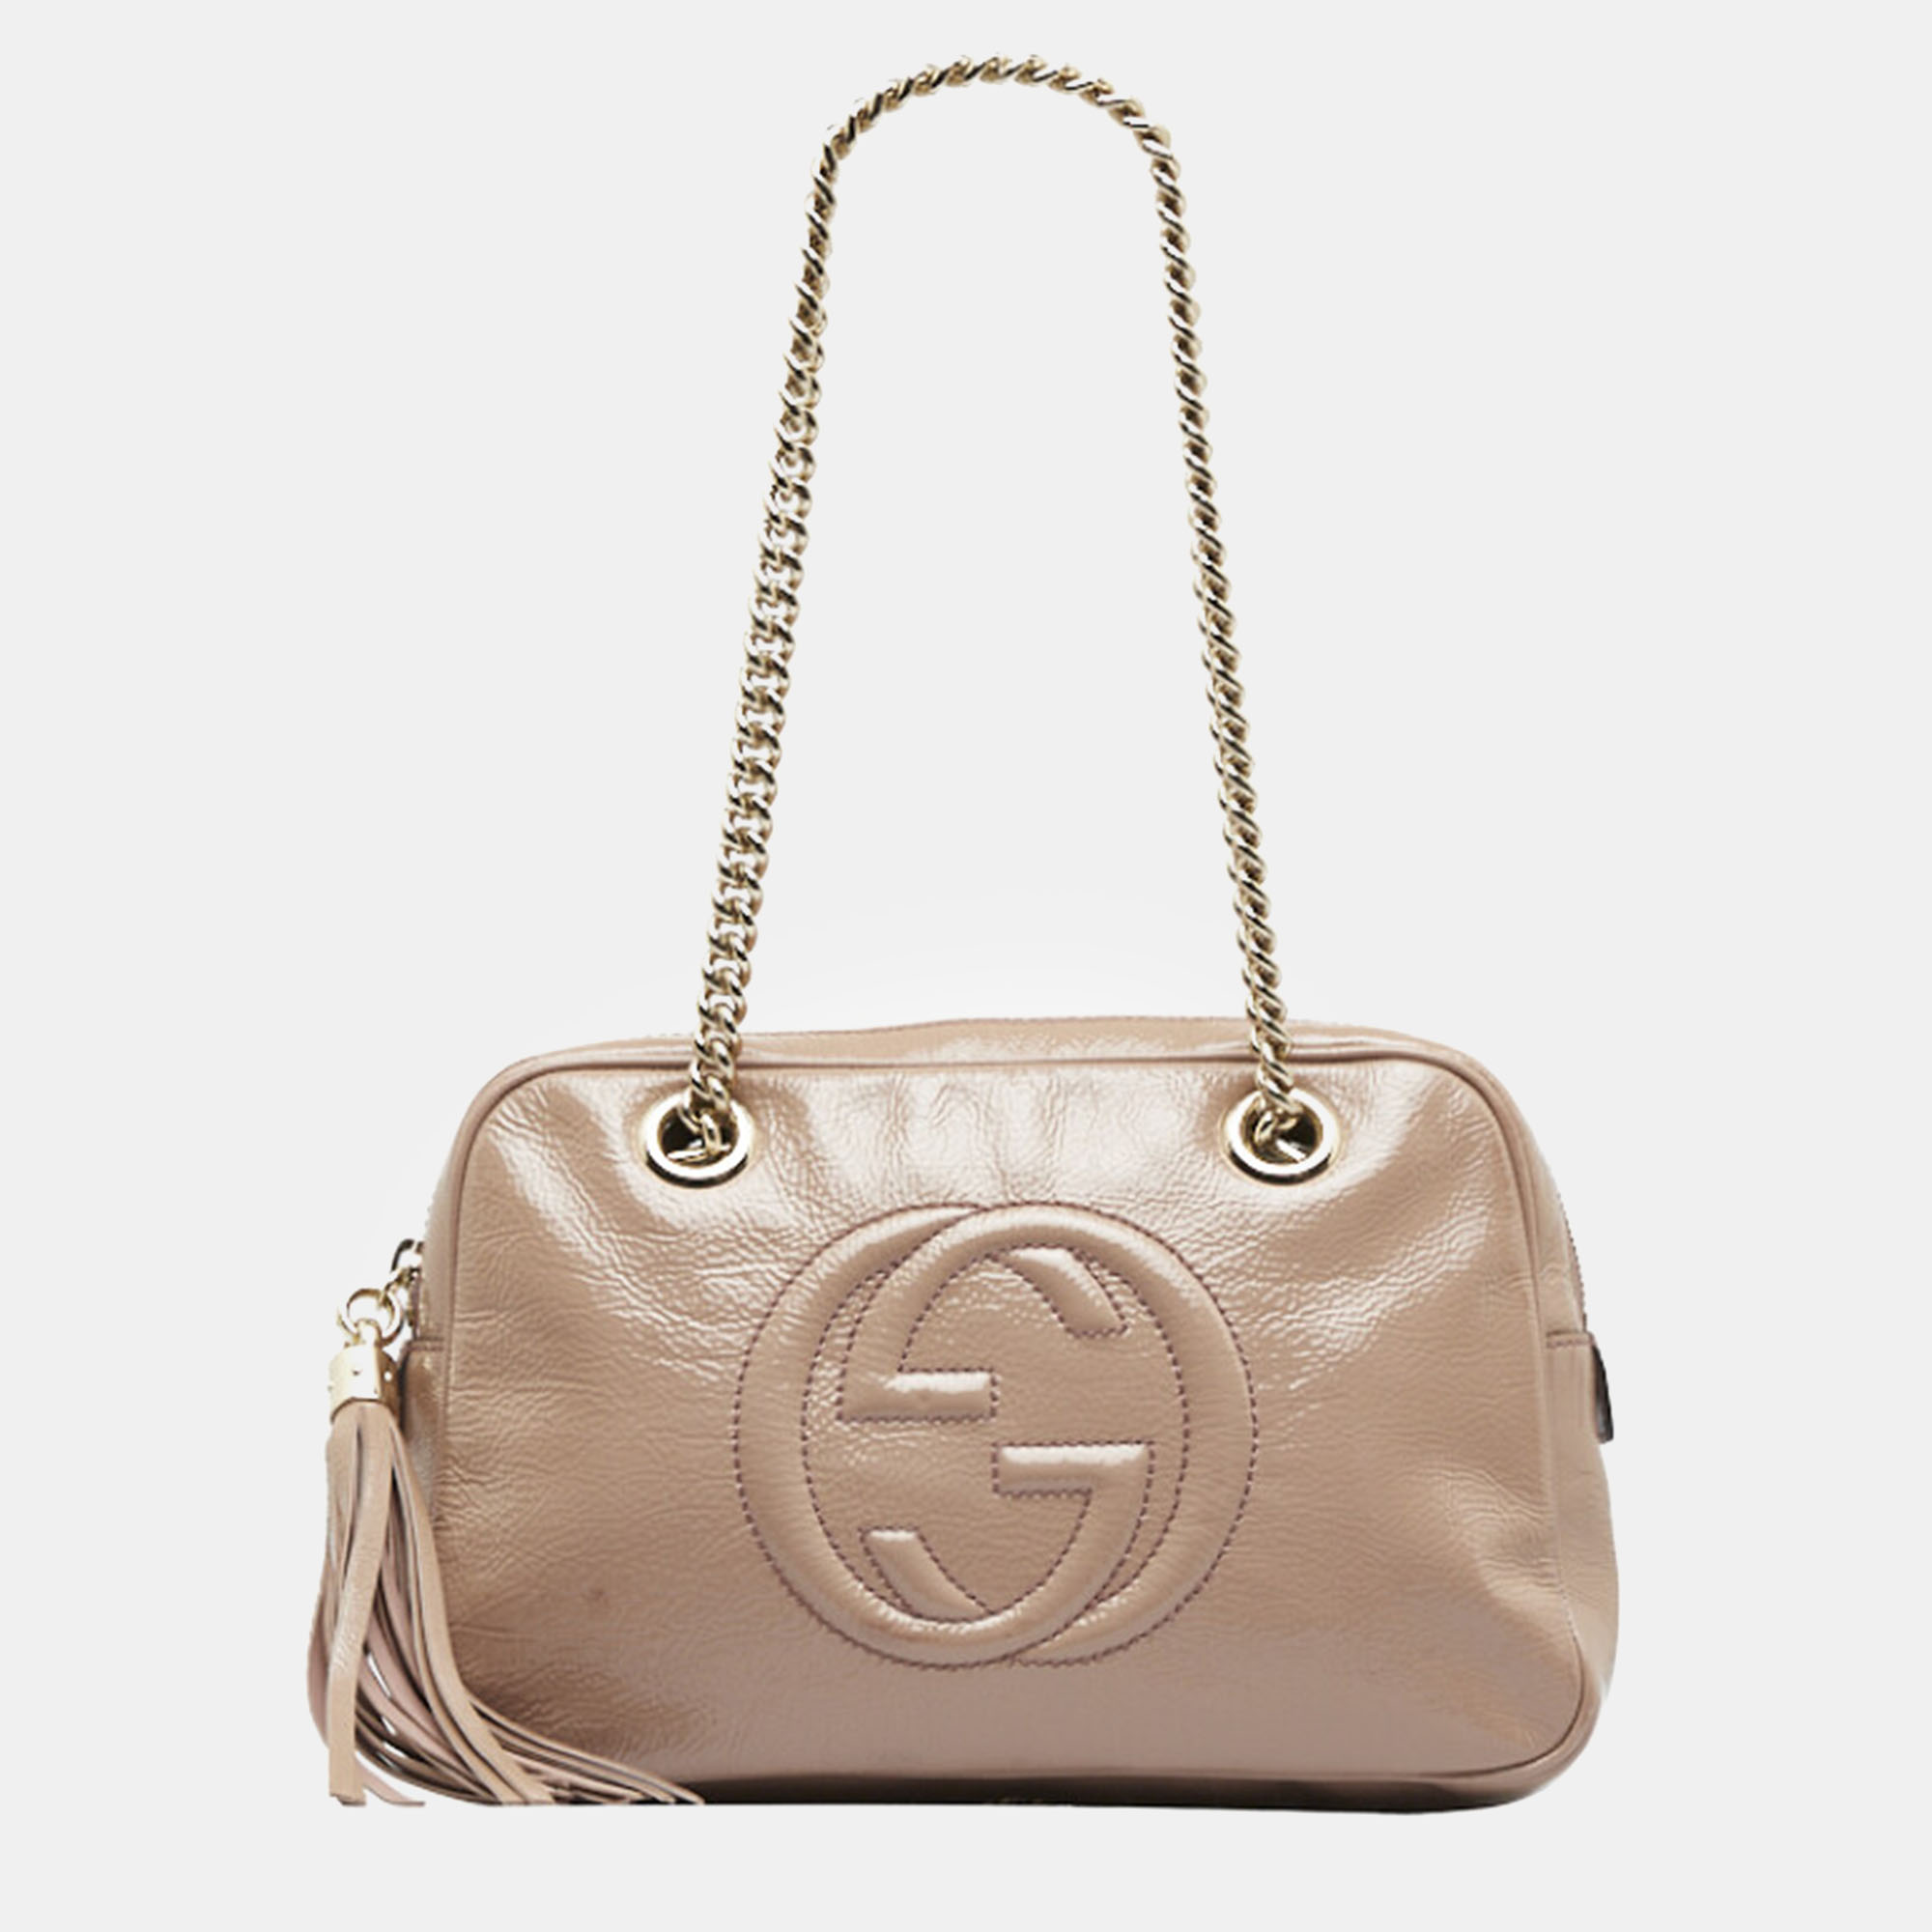 Pre-owned Gucci Pink Leather Soho Chain Shoulder Bag